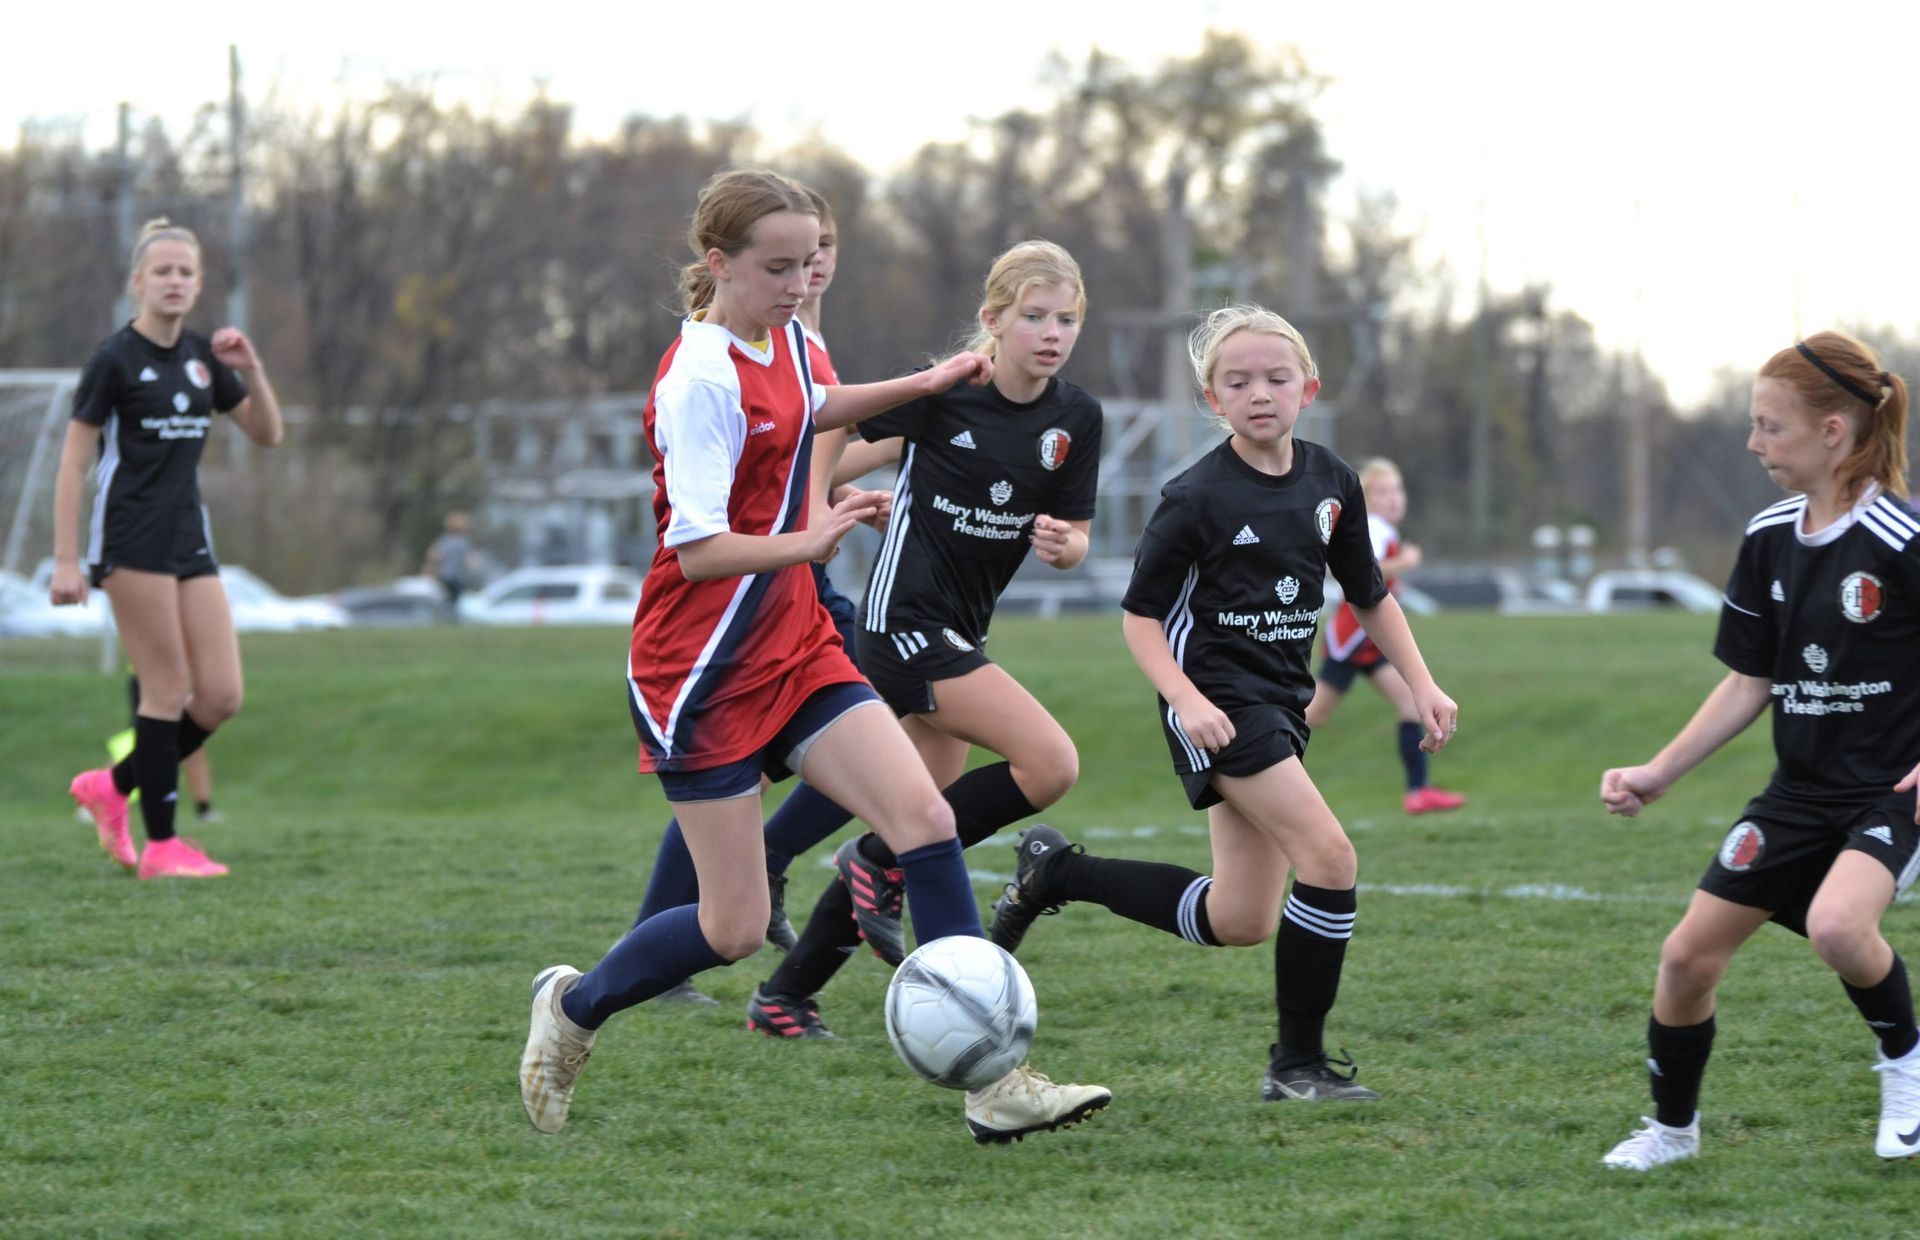 Clarke County Soccer League's female travel player dribbling against 4 players. 